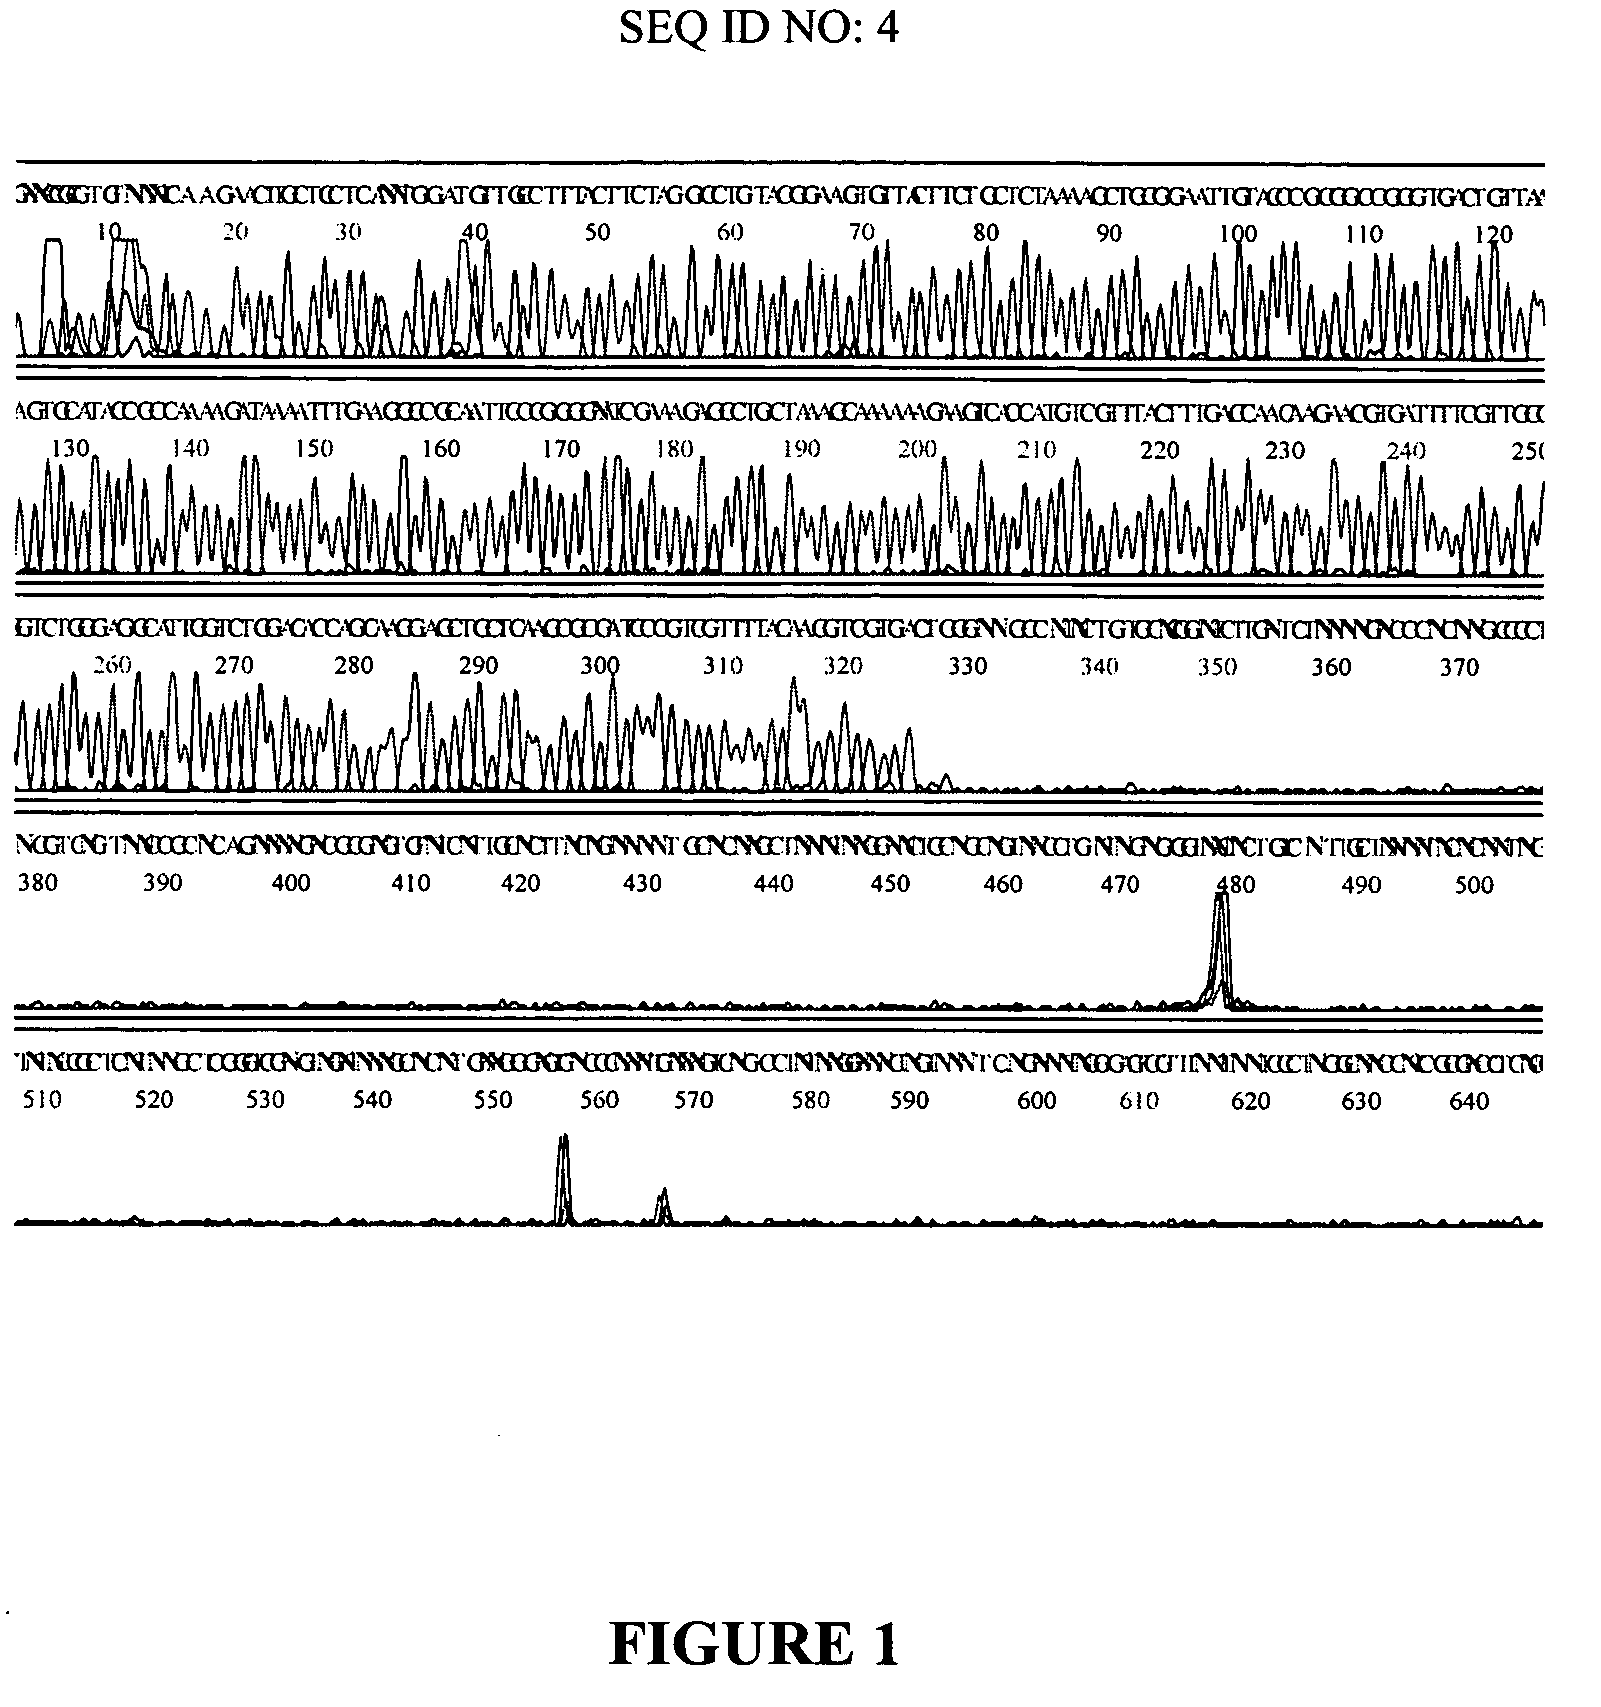 Multiply-primed amplification of nucleic acid sequences